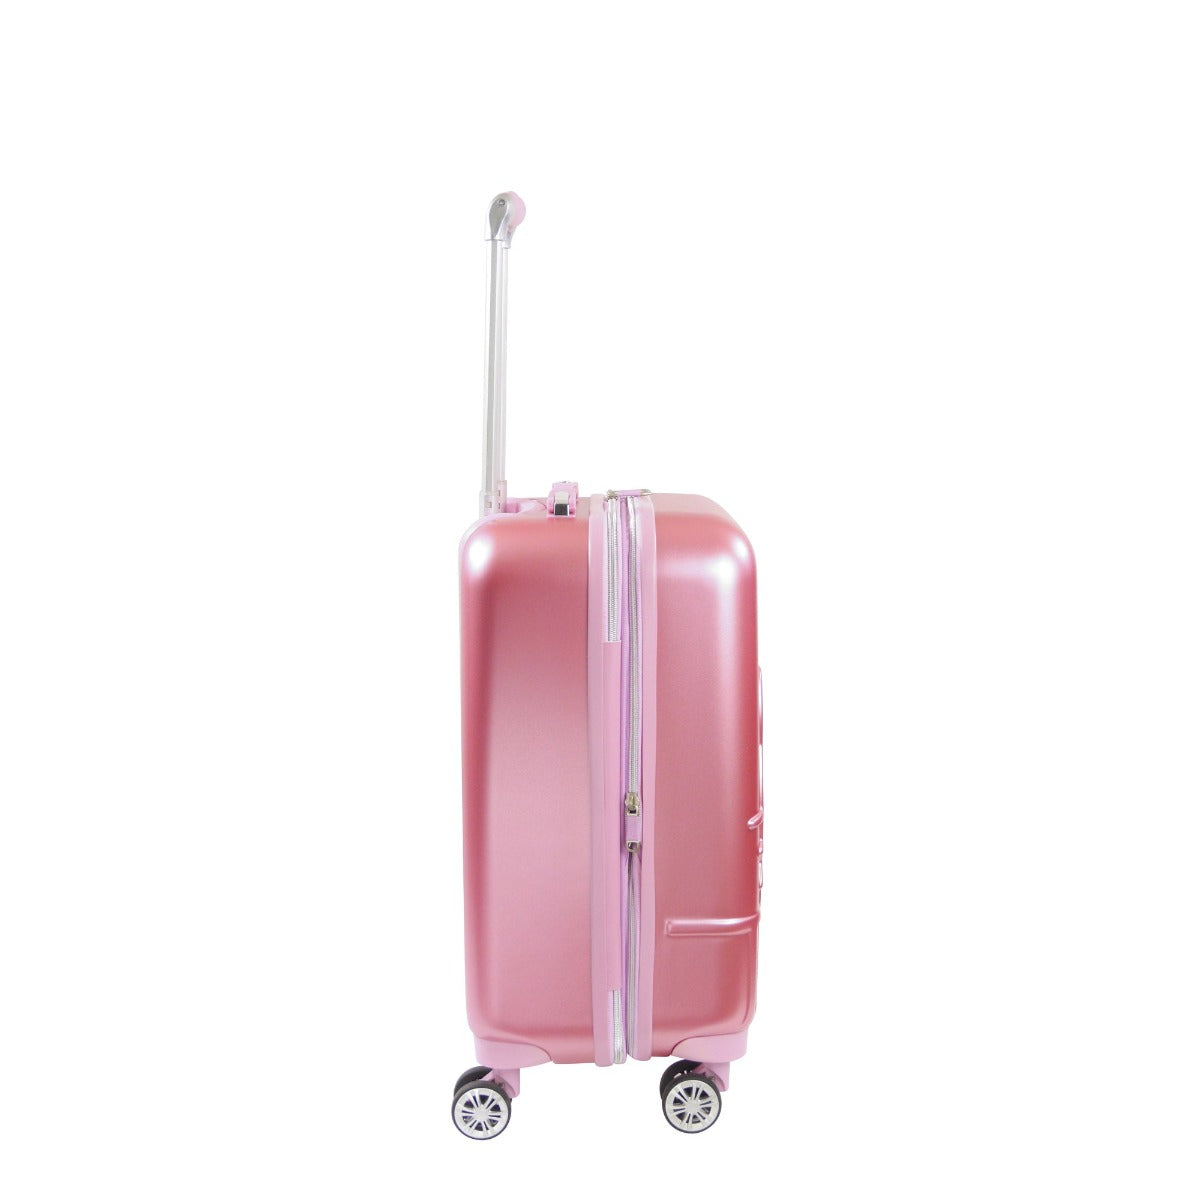 Shop Girls Hello Kitty Suitcase Cute Luggage – Luggage Factory